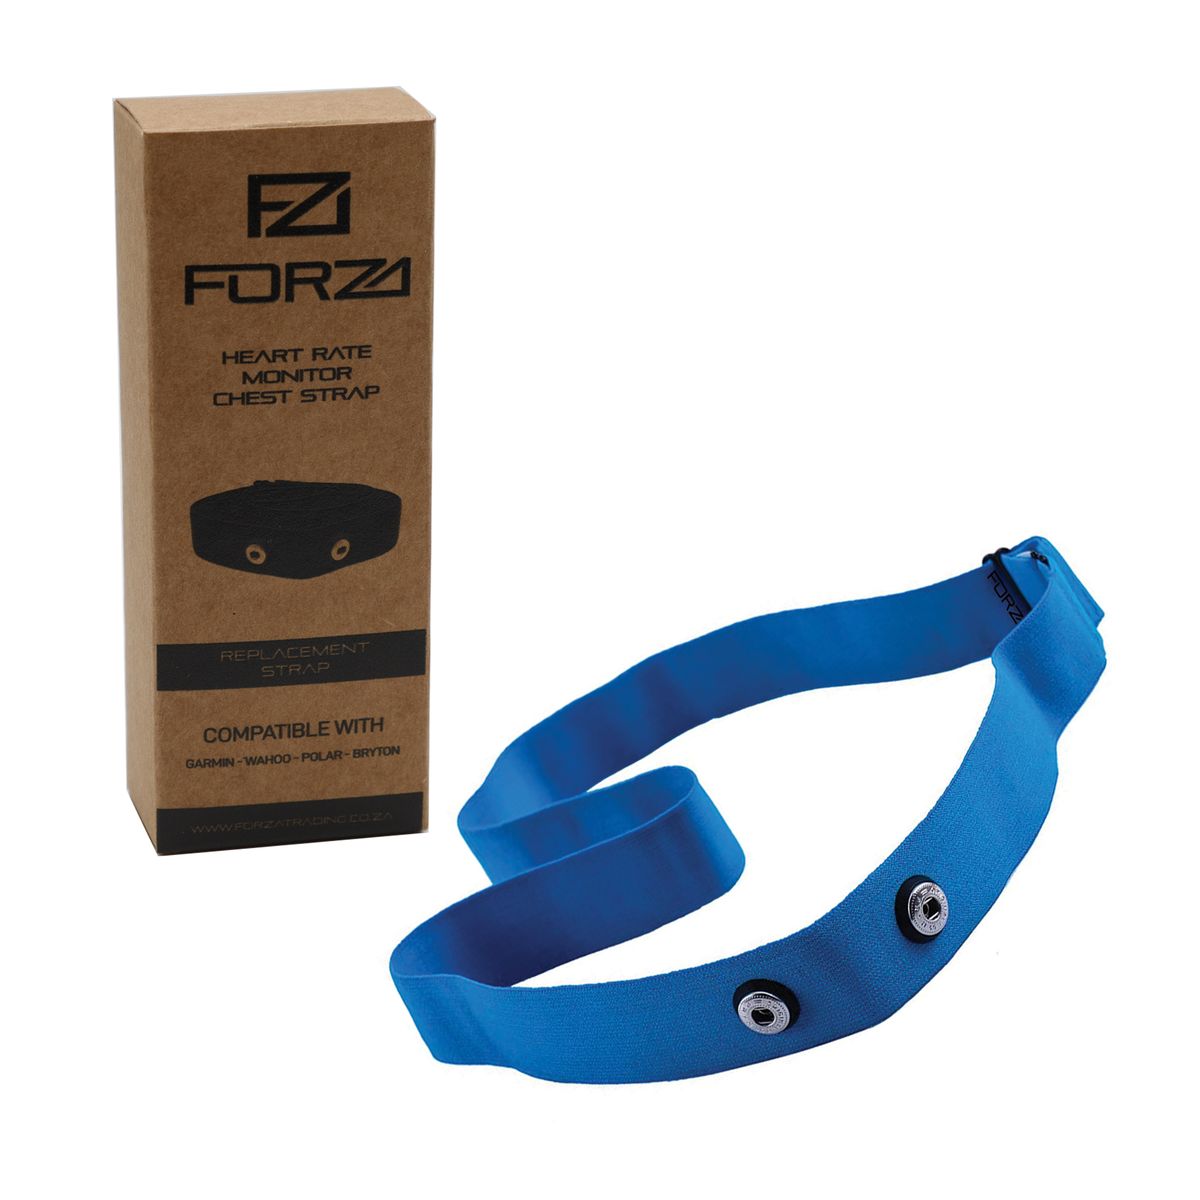 Forza Premium Heart Rate Monitor Strap | Buy Online in South Africa | takealot.com